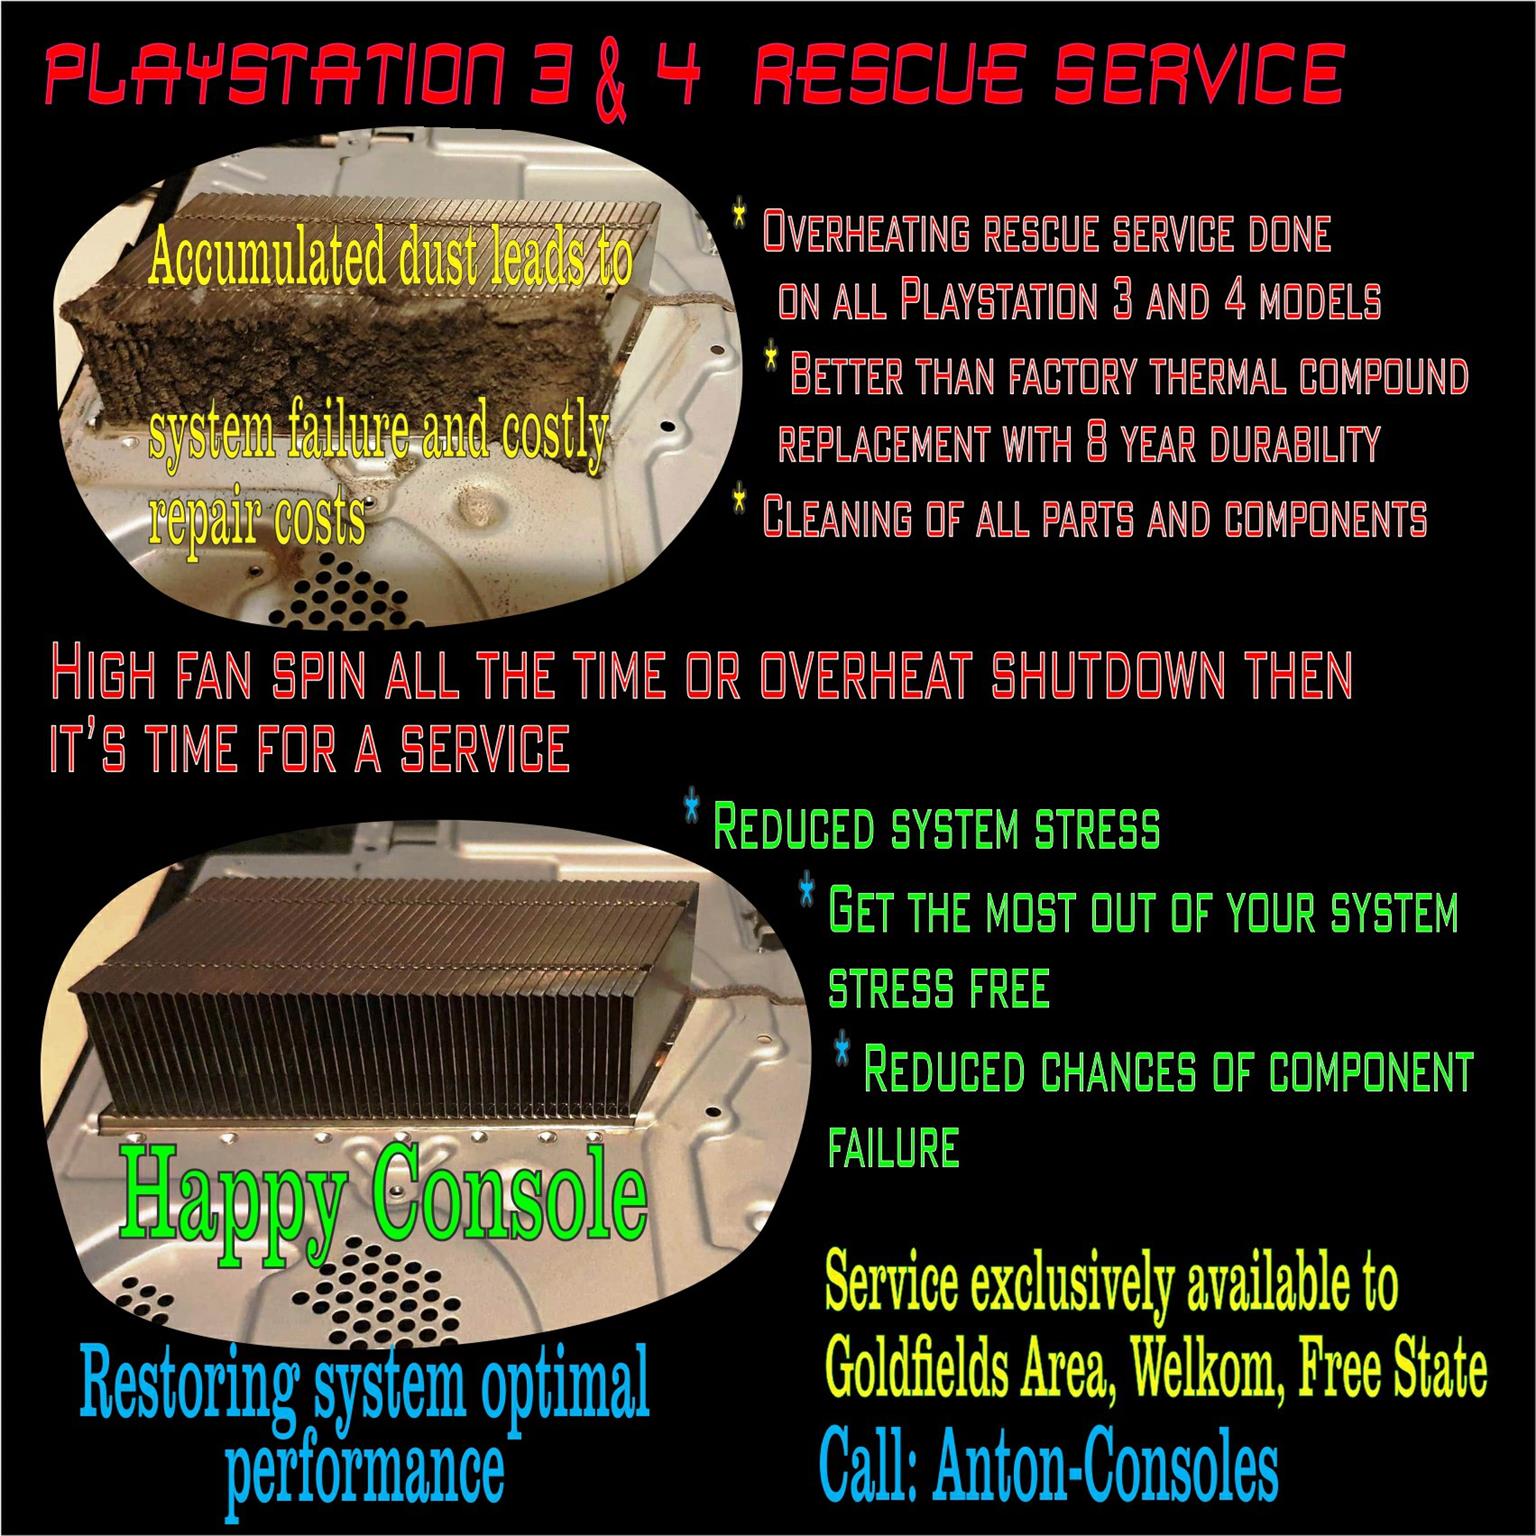 PlayStation 2,3,4 Repairs and Service-Welkom-PS2-PS3-PS4